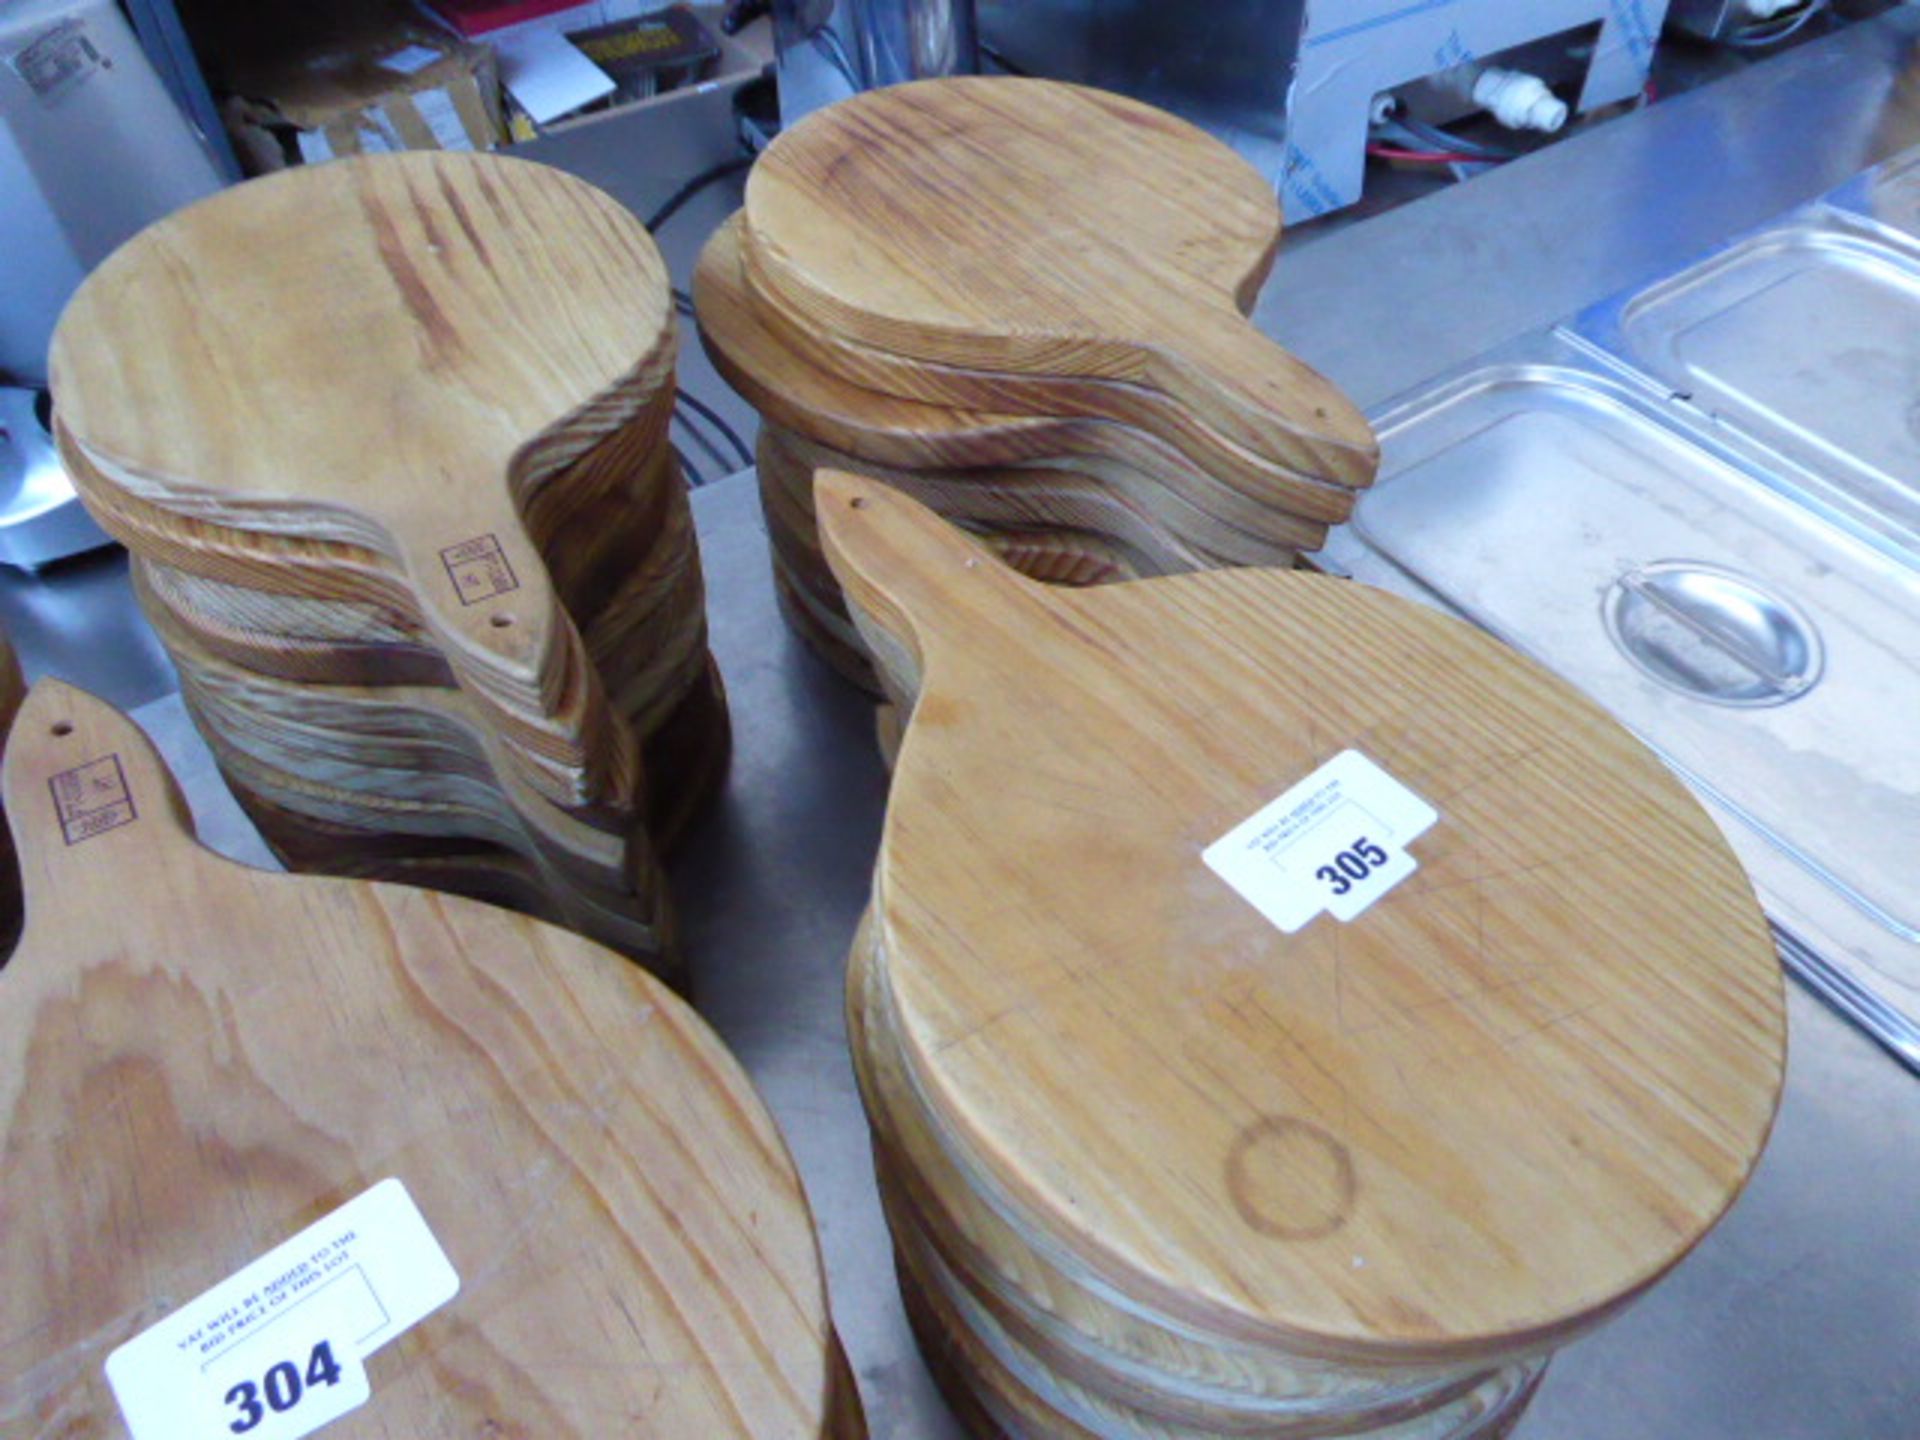 Approx 24 24cm wooden paddle shaped serving platters